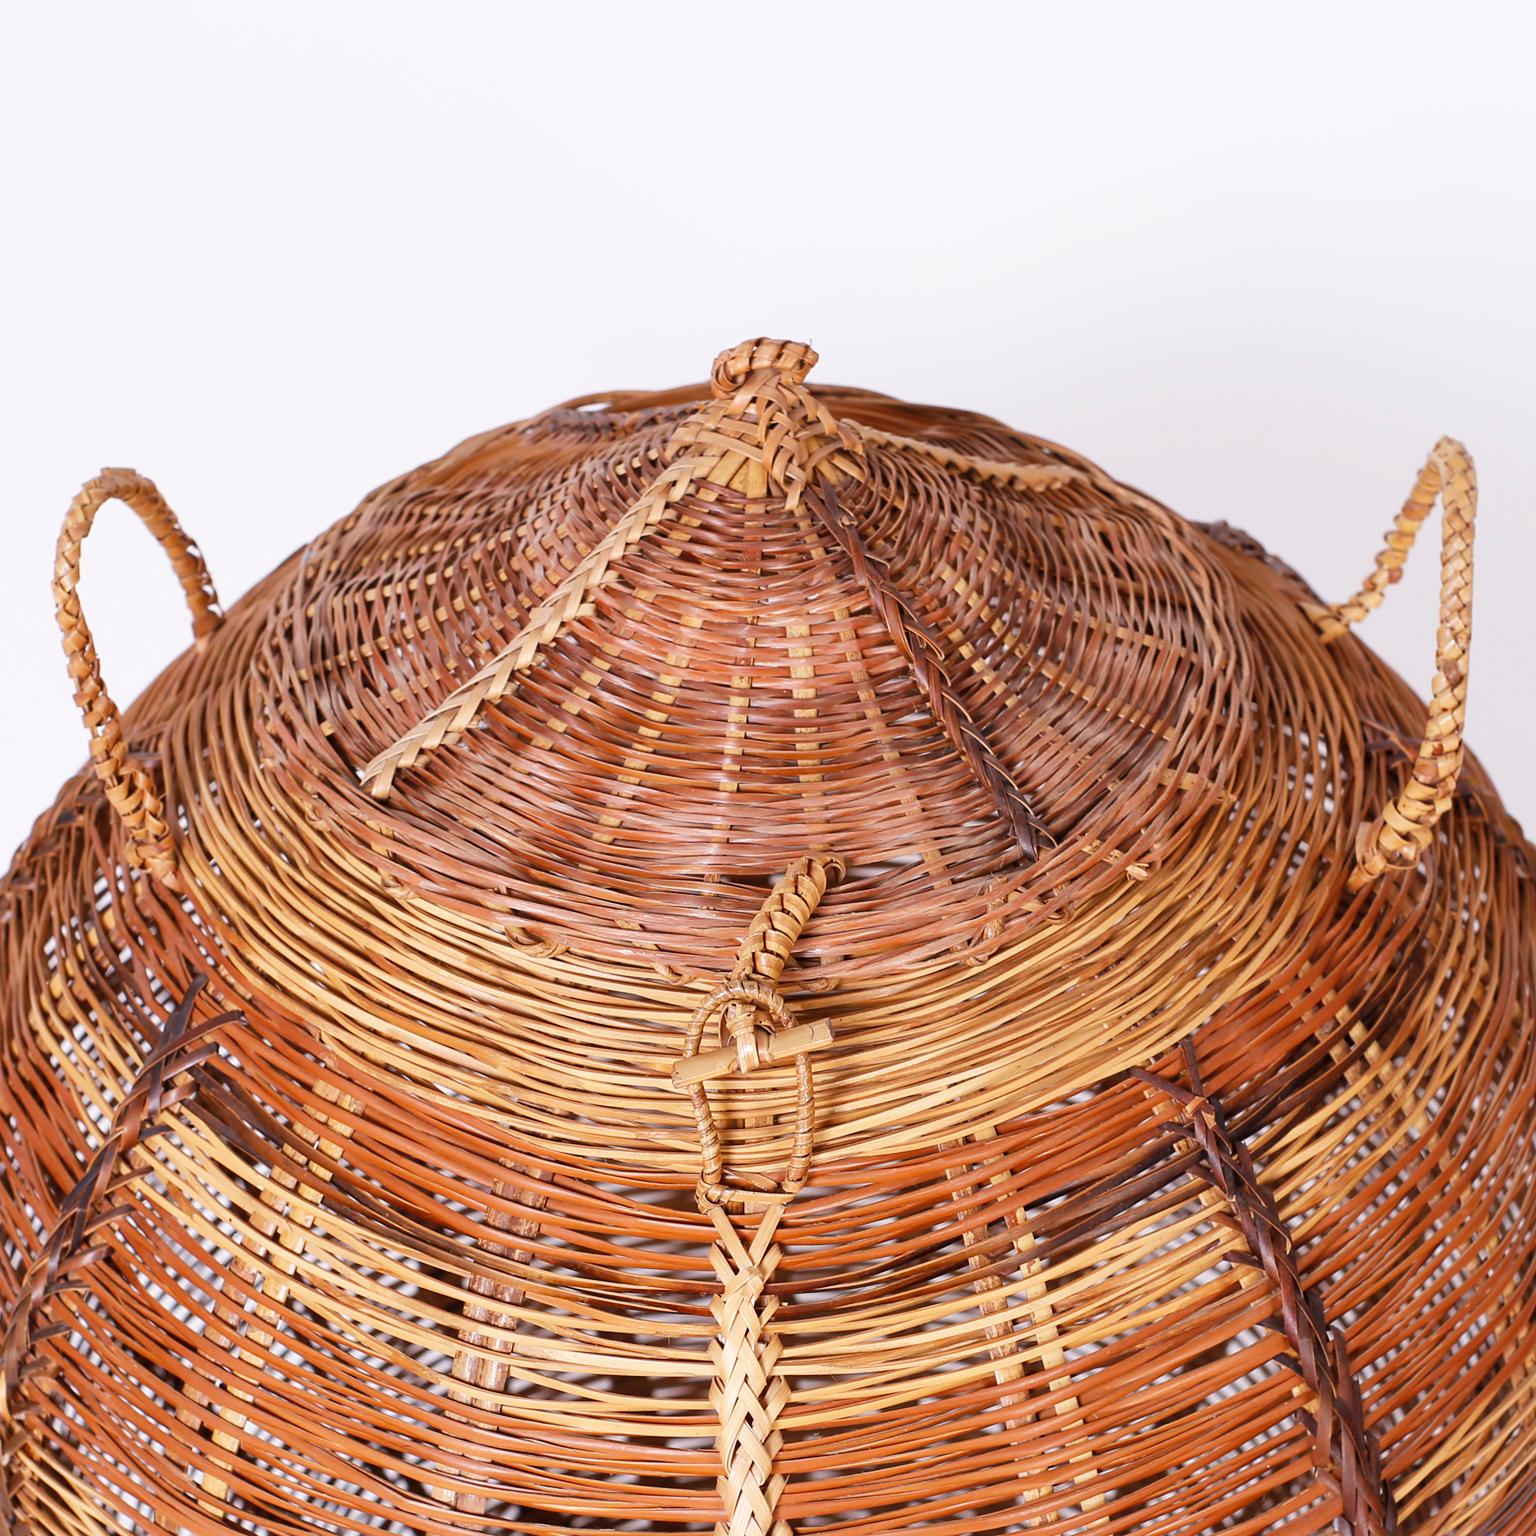 Indian Two Lidded Woven Reed Baskets